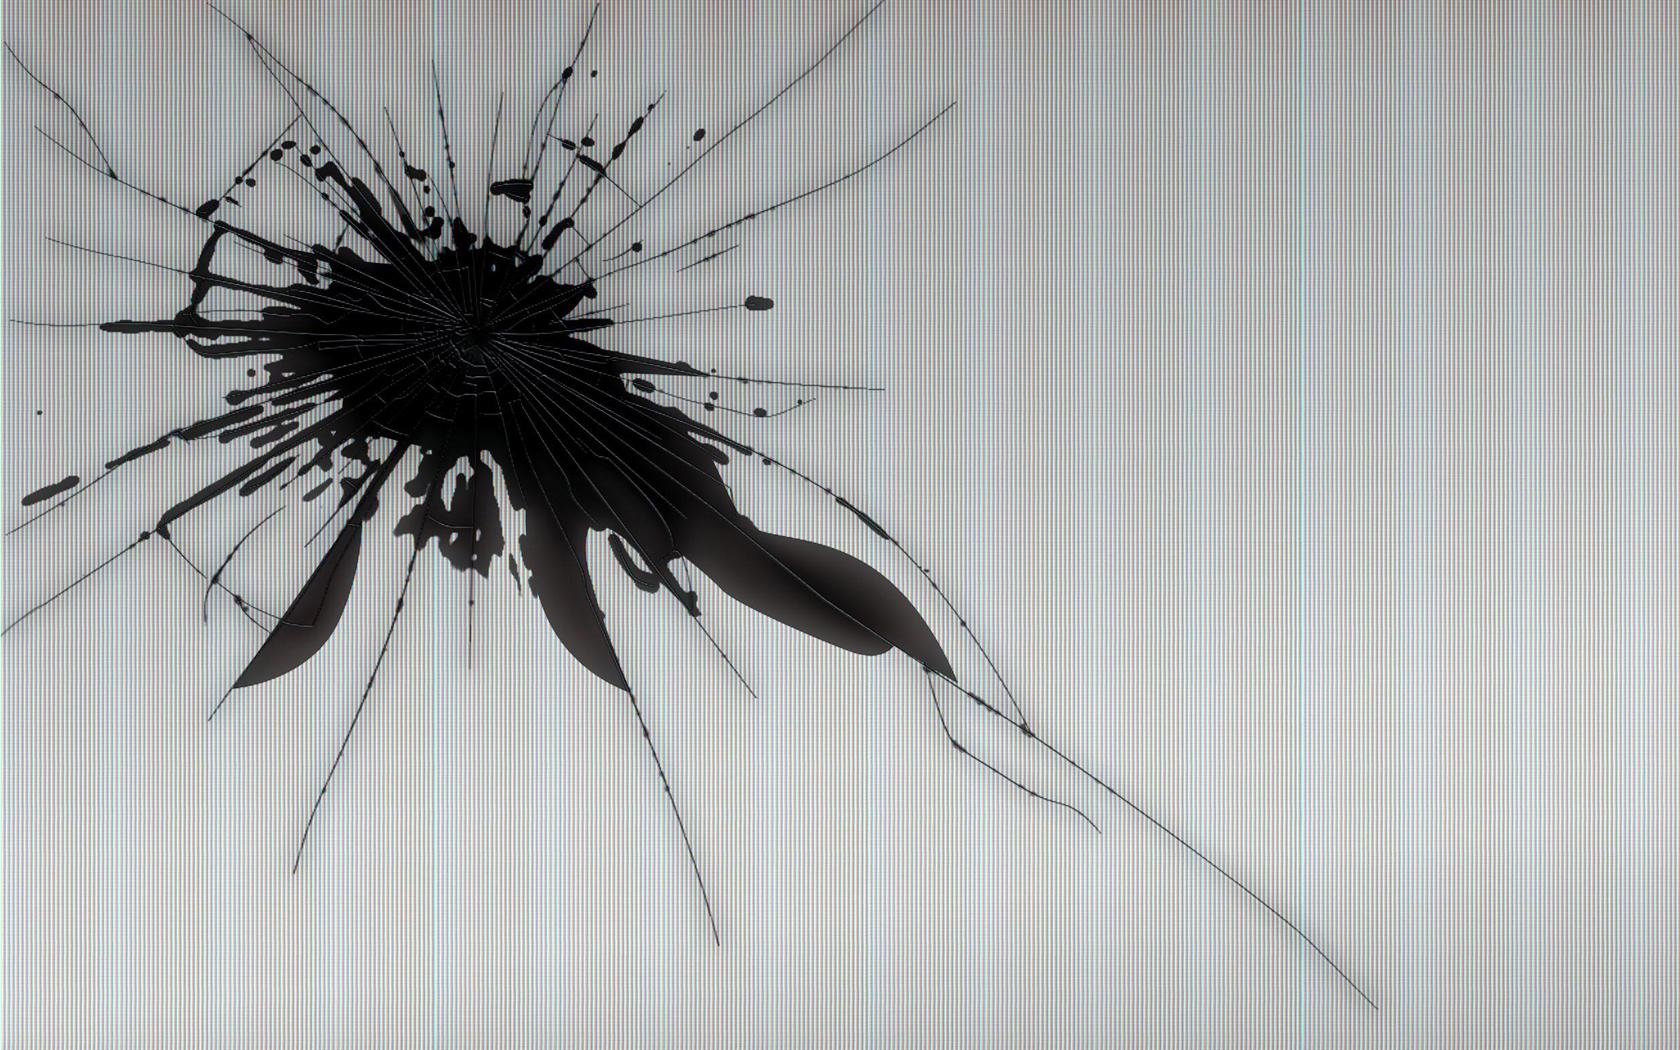 Cracked Screen Wallpaper 1680x1050 Cracked Screen None 1680x1050